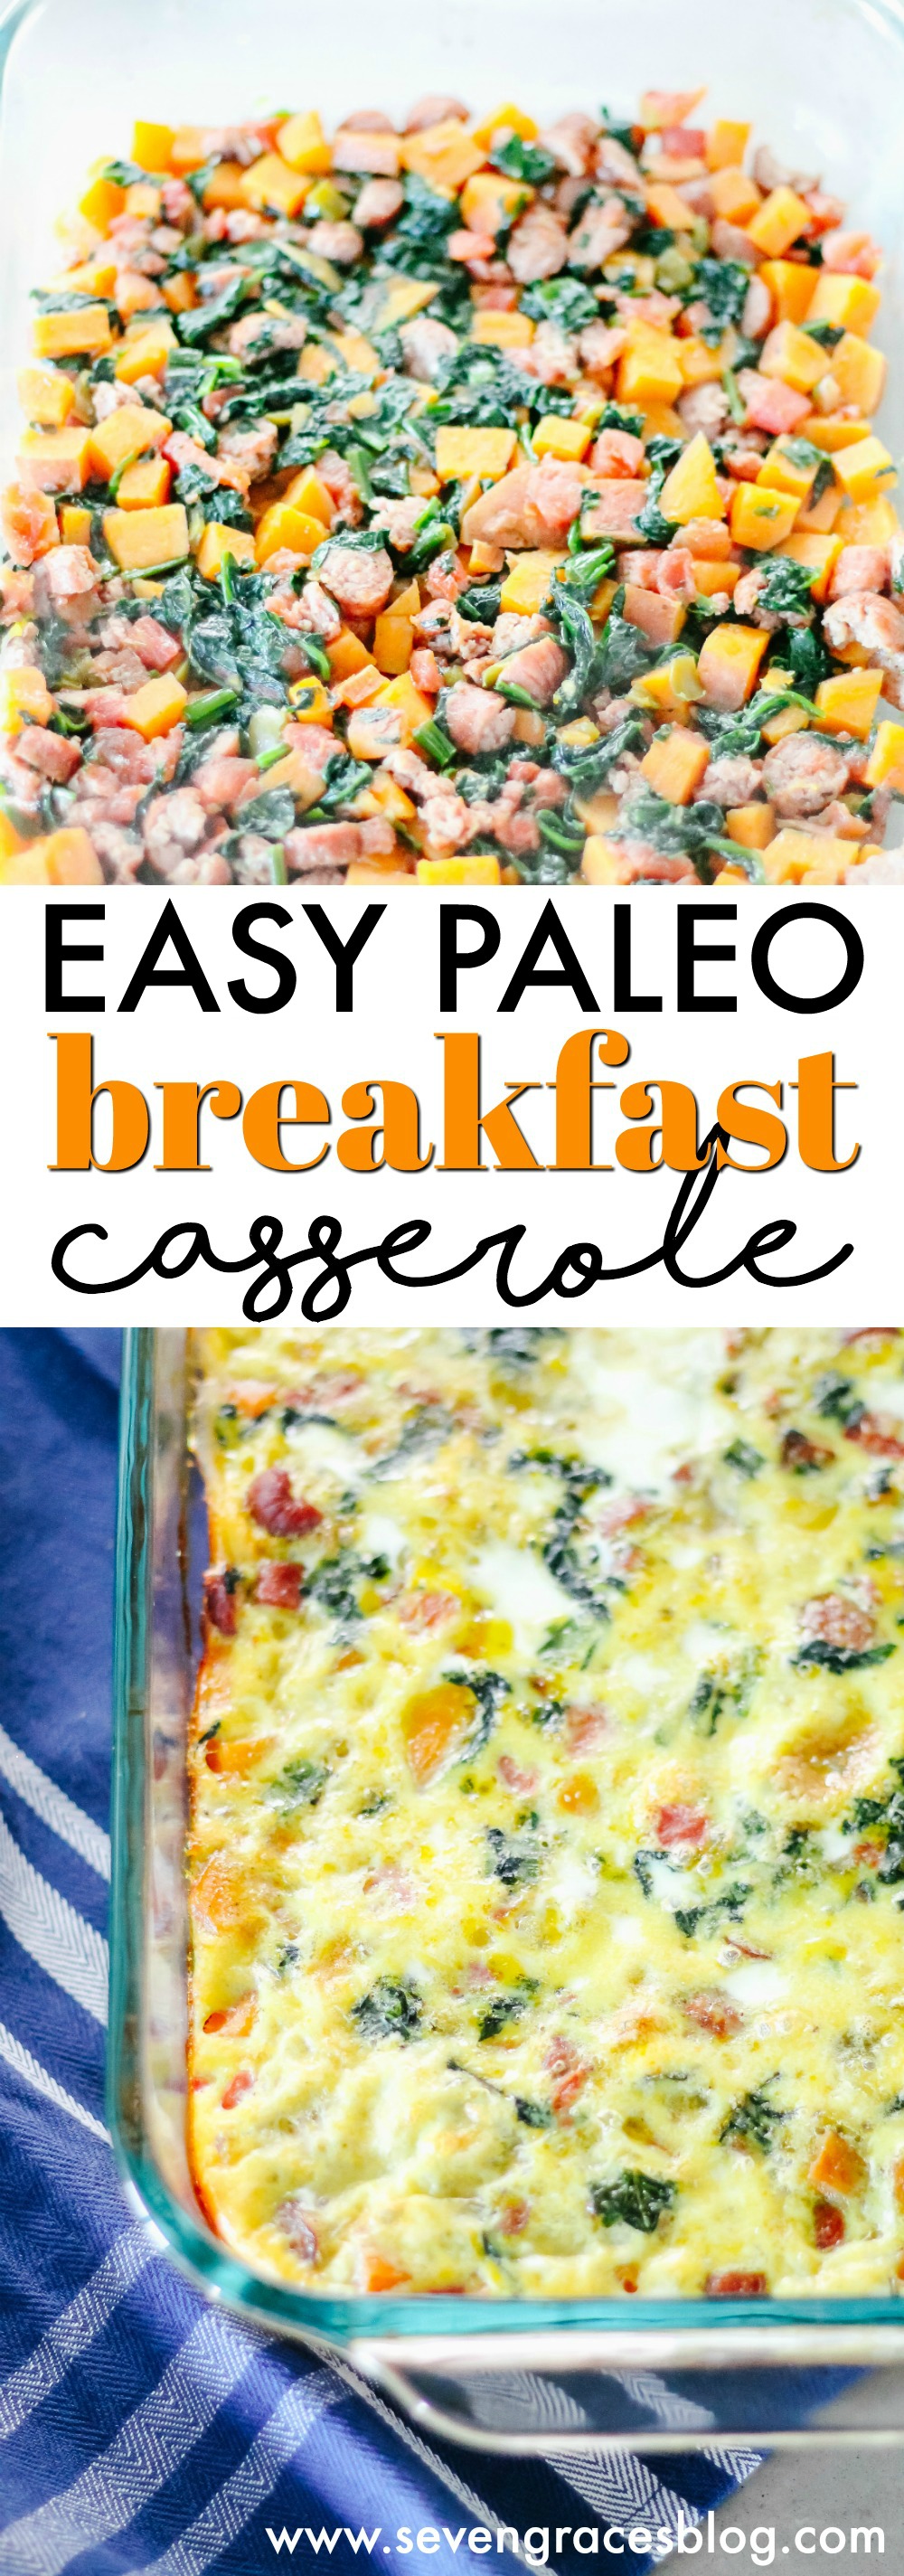 The best easy & delicious Paleo and Whole30 breakfast casserole. Gluten free, dairy free. The perfect breakfast bake! #casserole #paleo #whole30